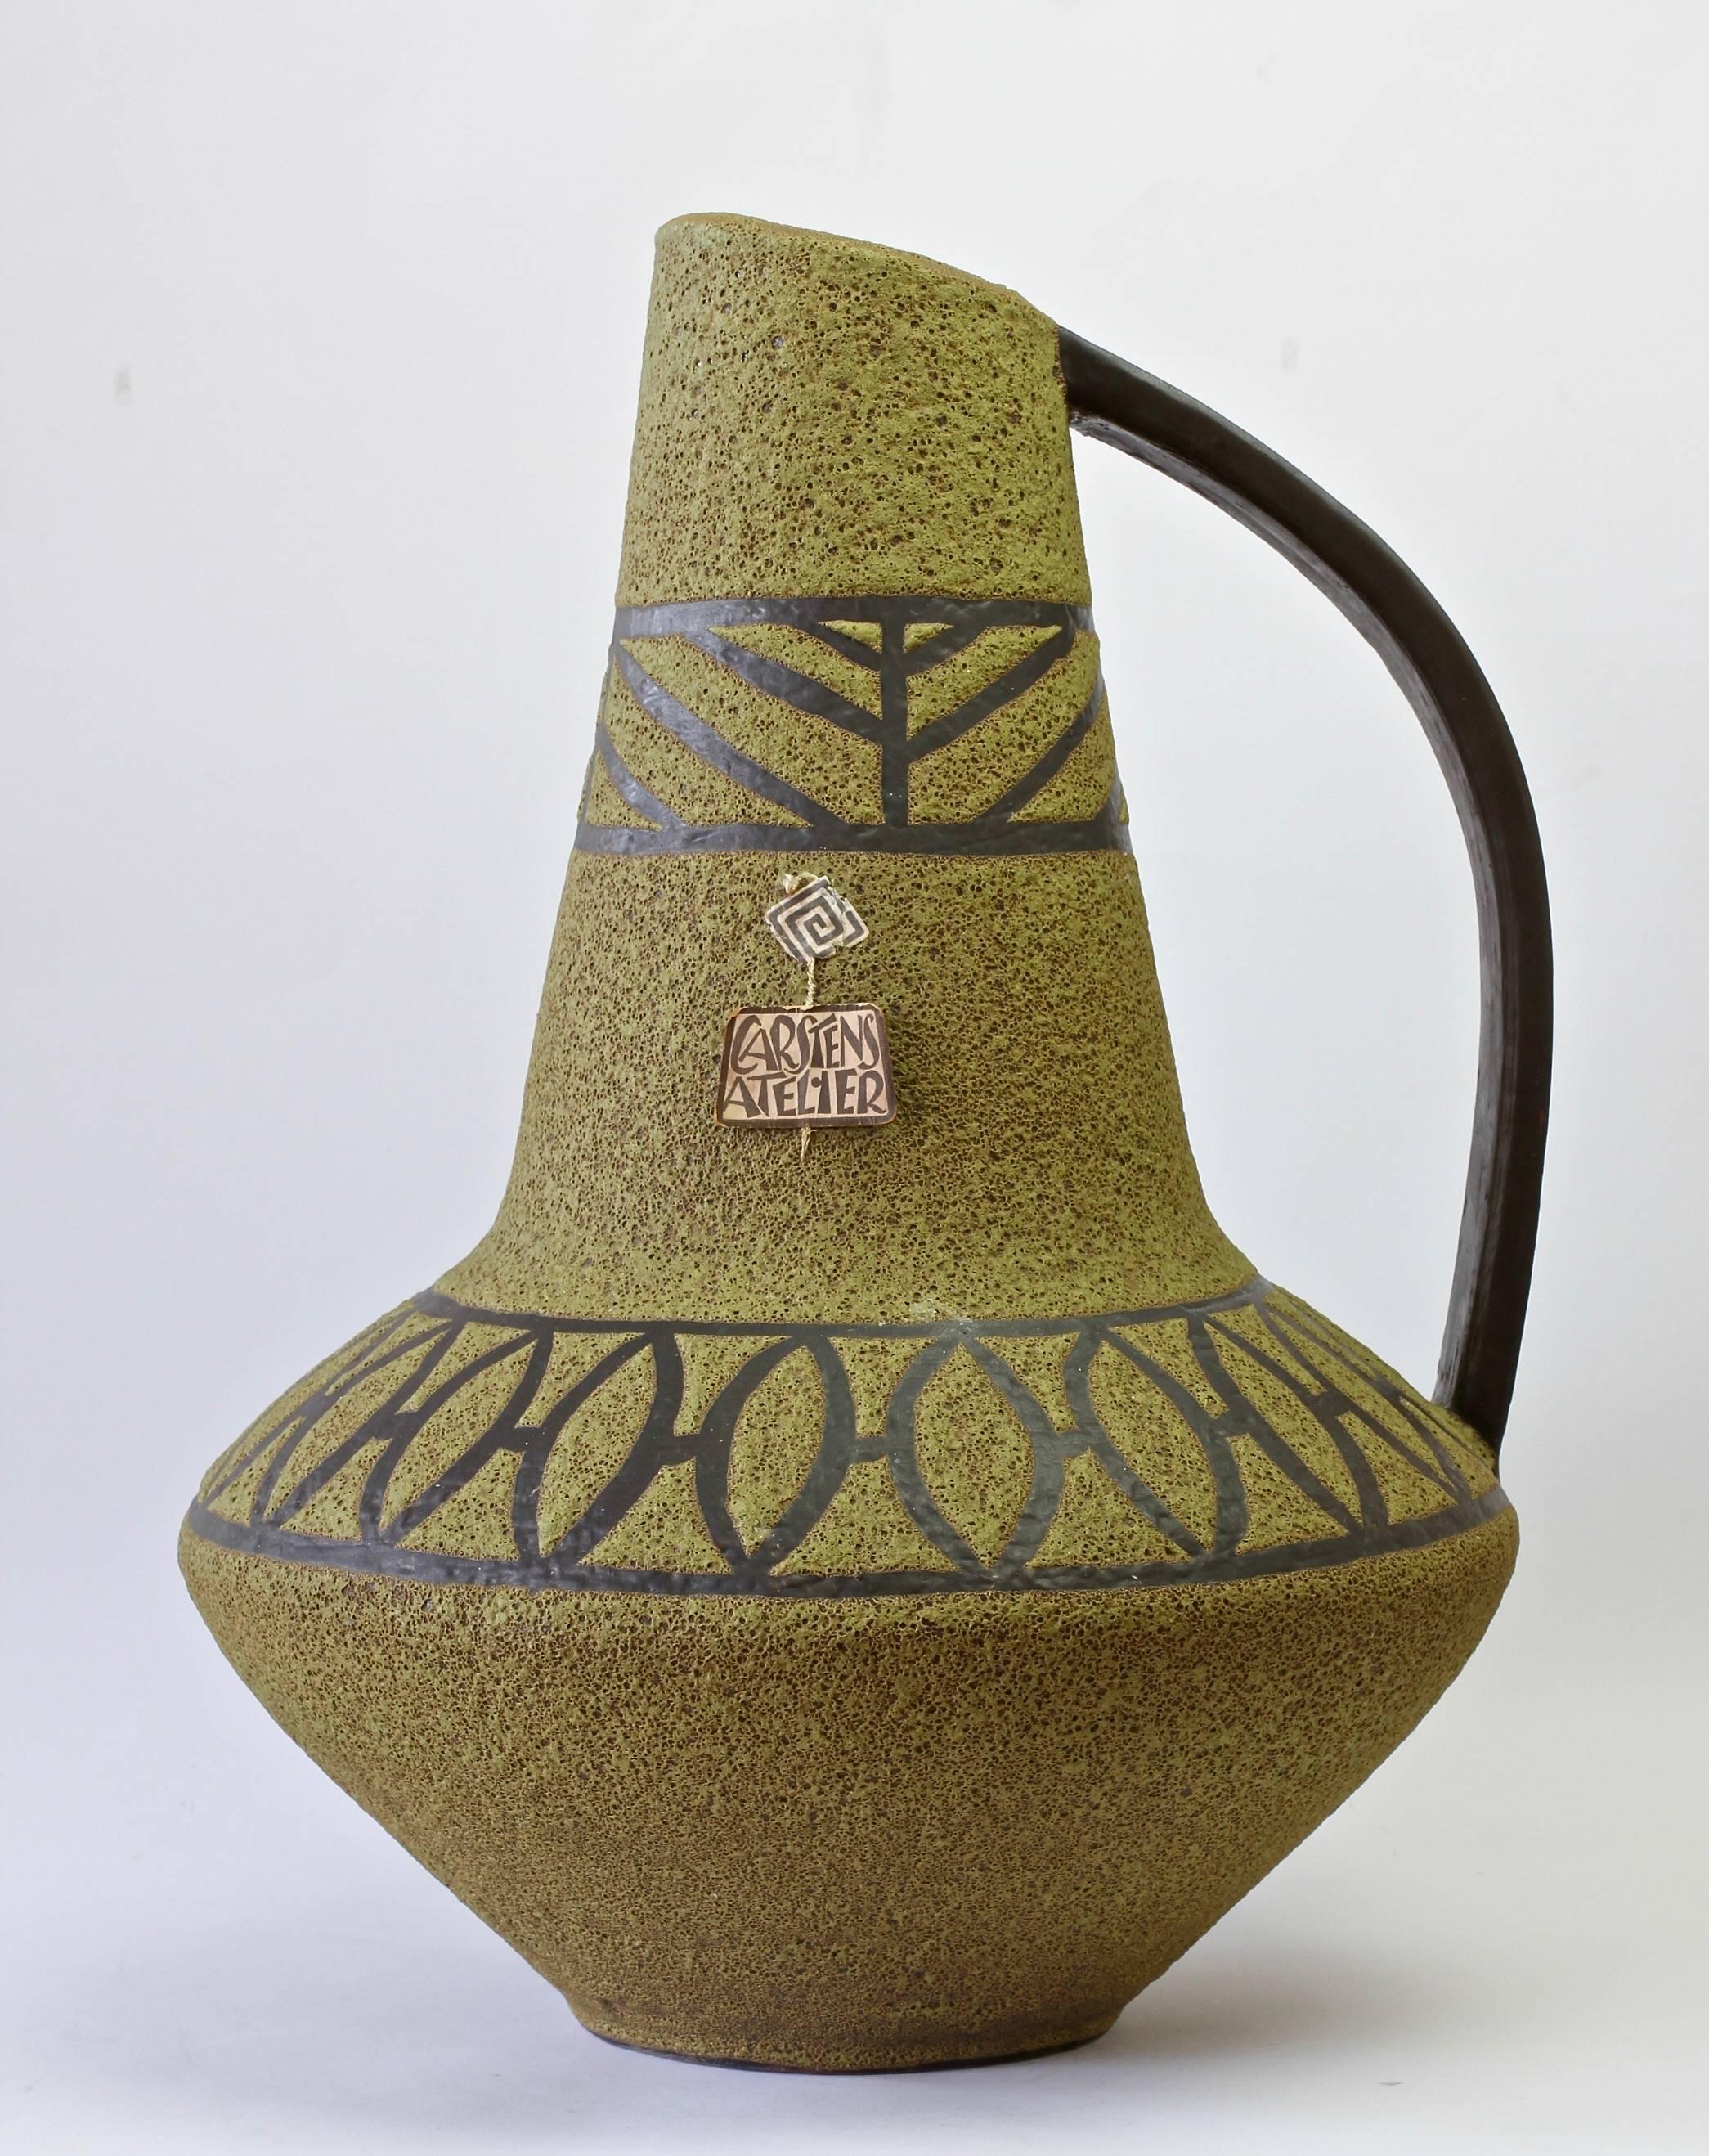 1970s Large Green Lava Glazed West German Pottery Floor Vase by Carstens Atelier For Sale 6